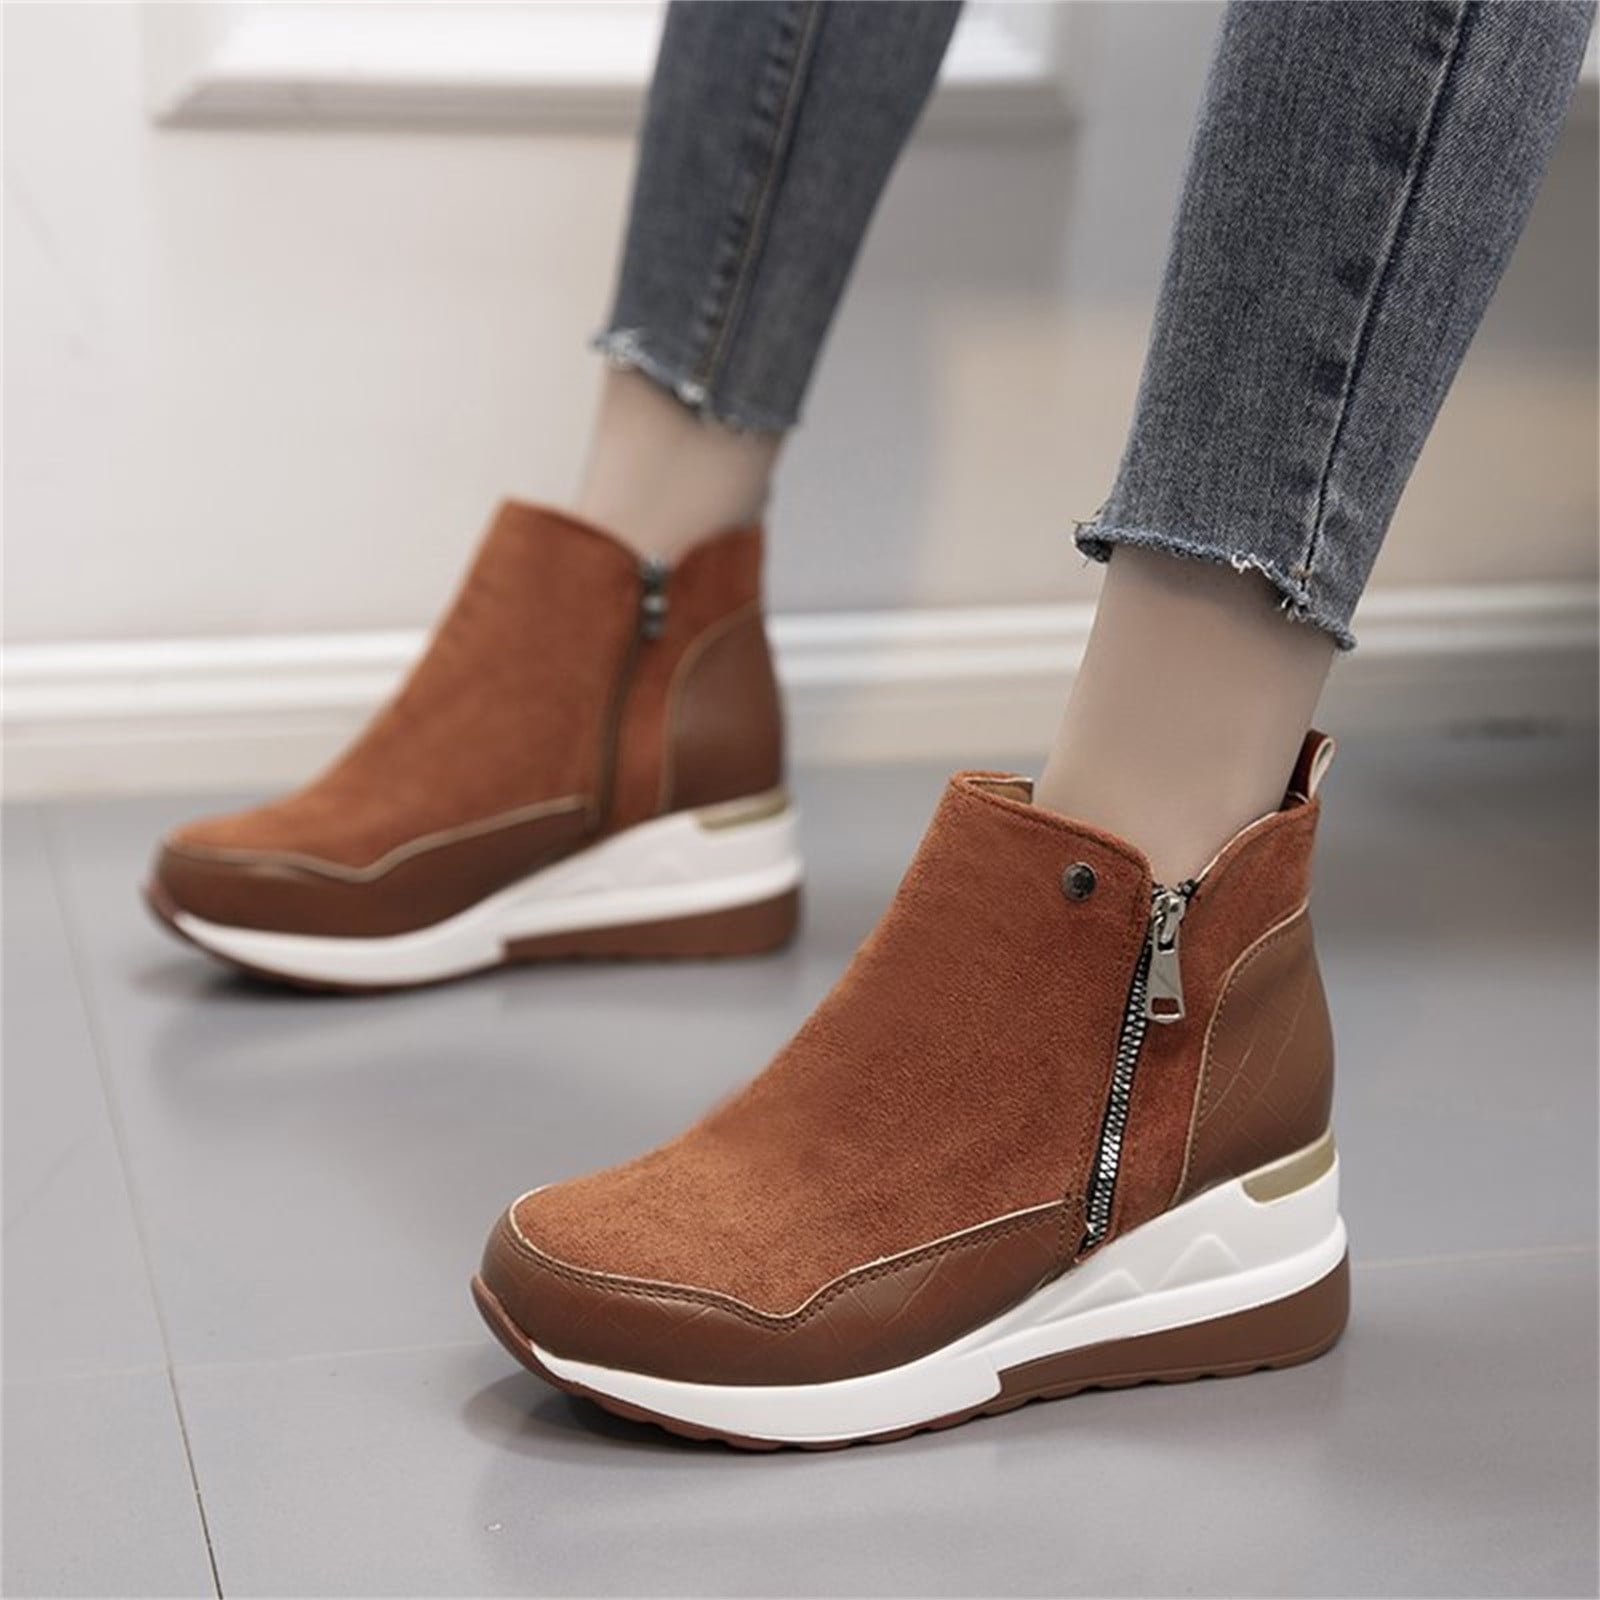 Woman Wedge High Heel Ankle Boots Side Zipper Round Toe Thick Platform Antislip Soft Rhinestone Casual Sneaker 